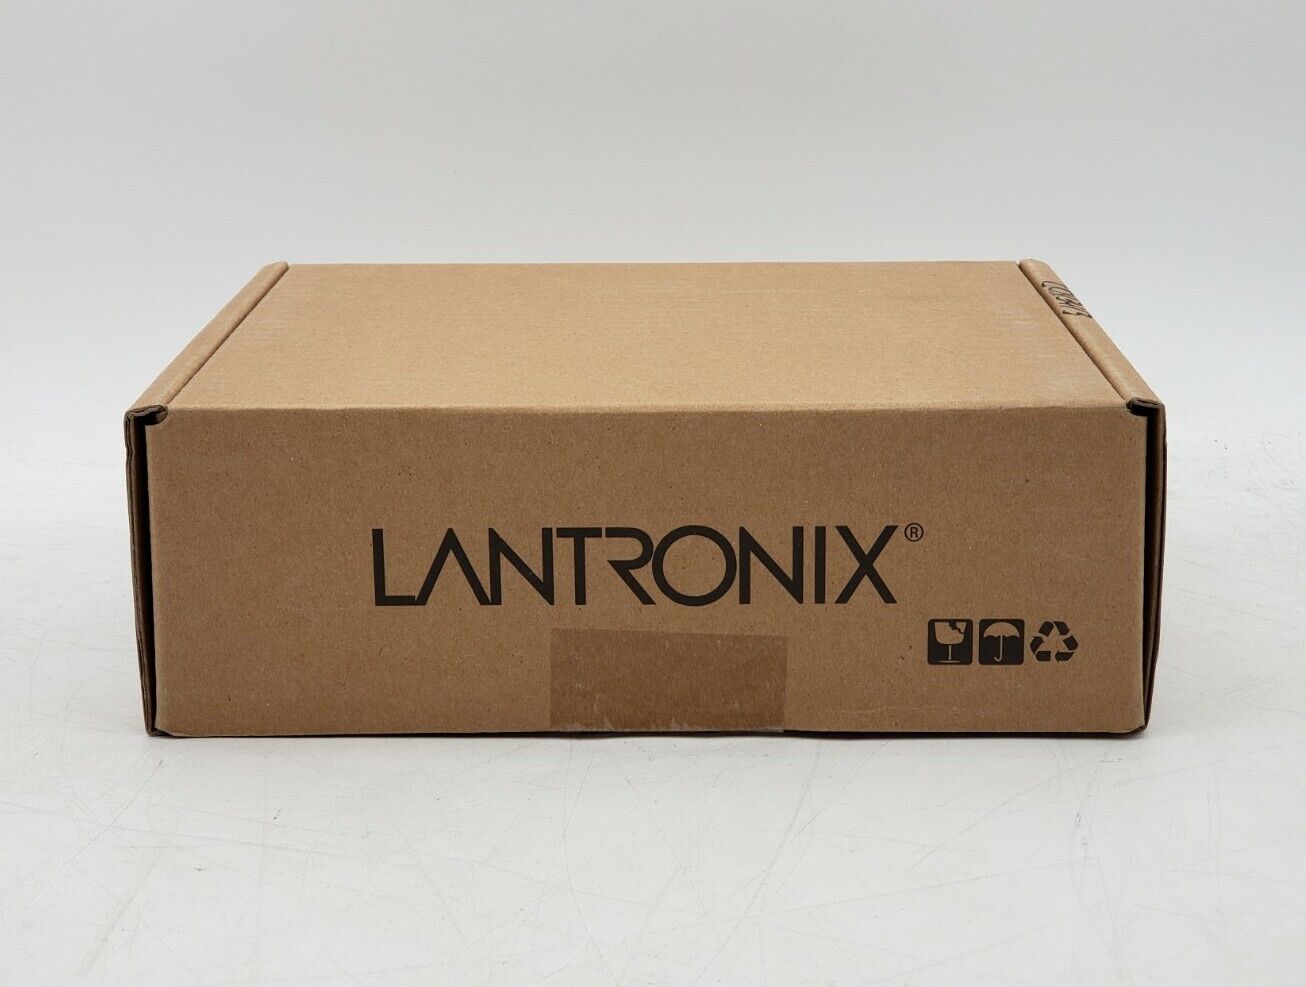 Lantronix Device Networking Ud2100002-01 Uds2100 Device Server BRAND NEW